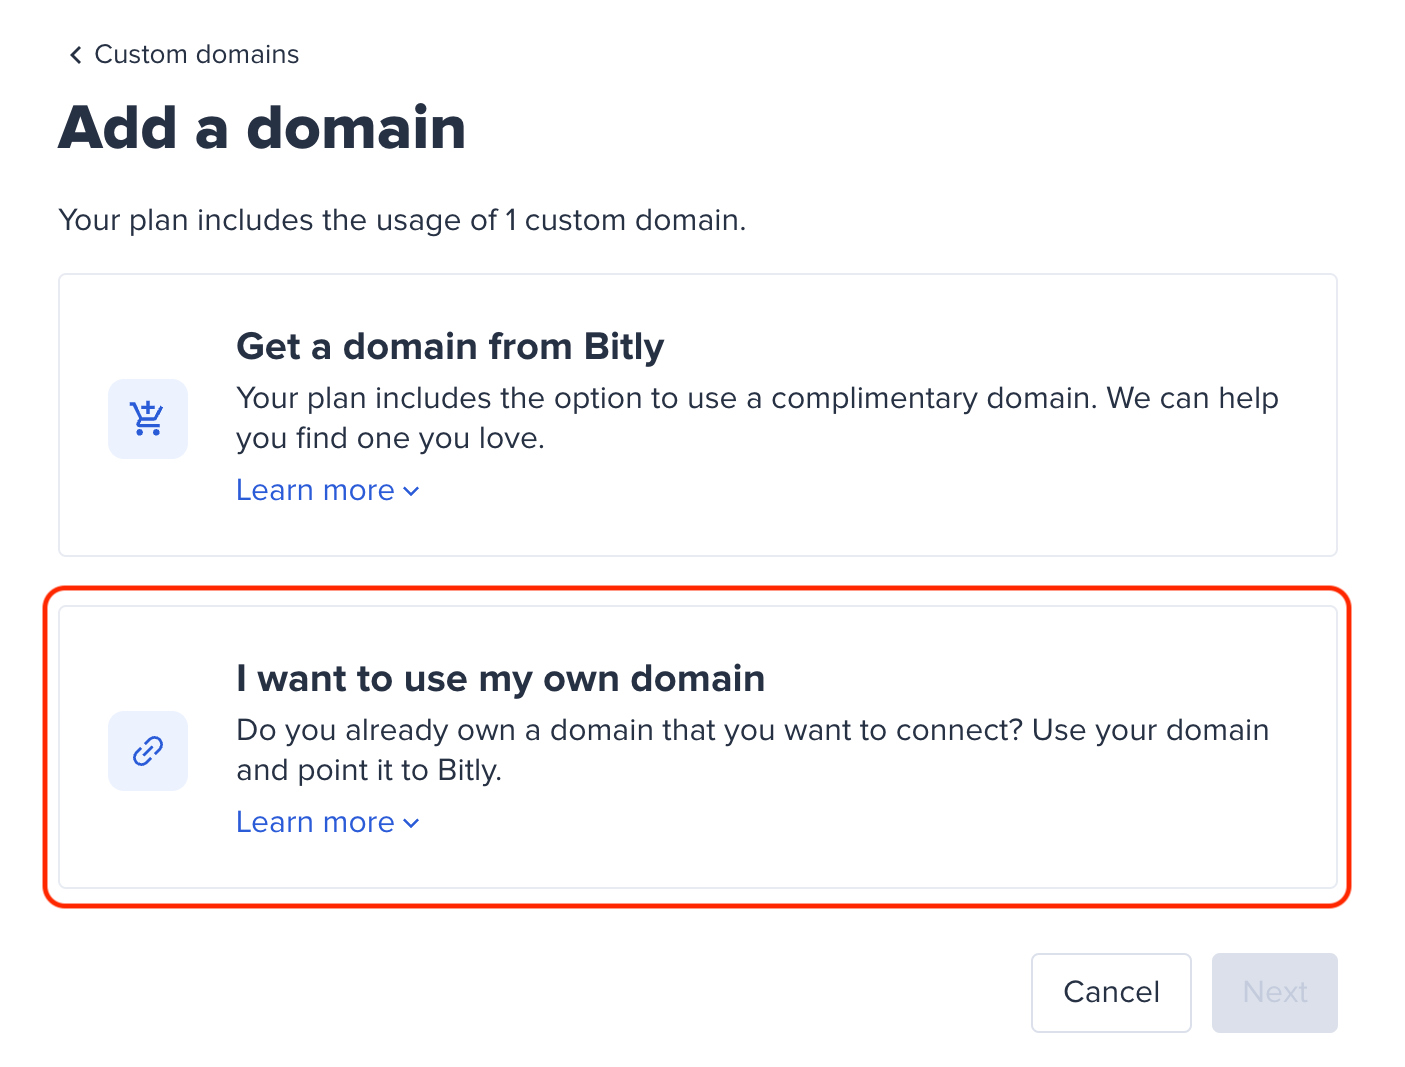 I want to use my own domain circled from custom domains page